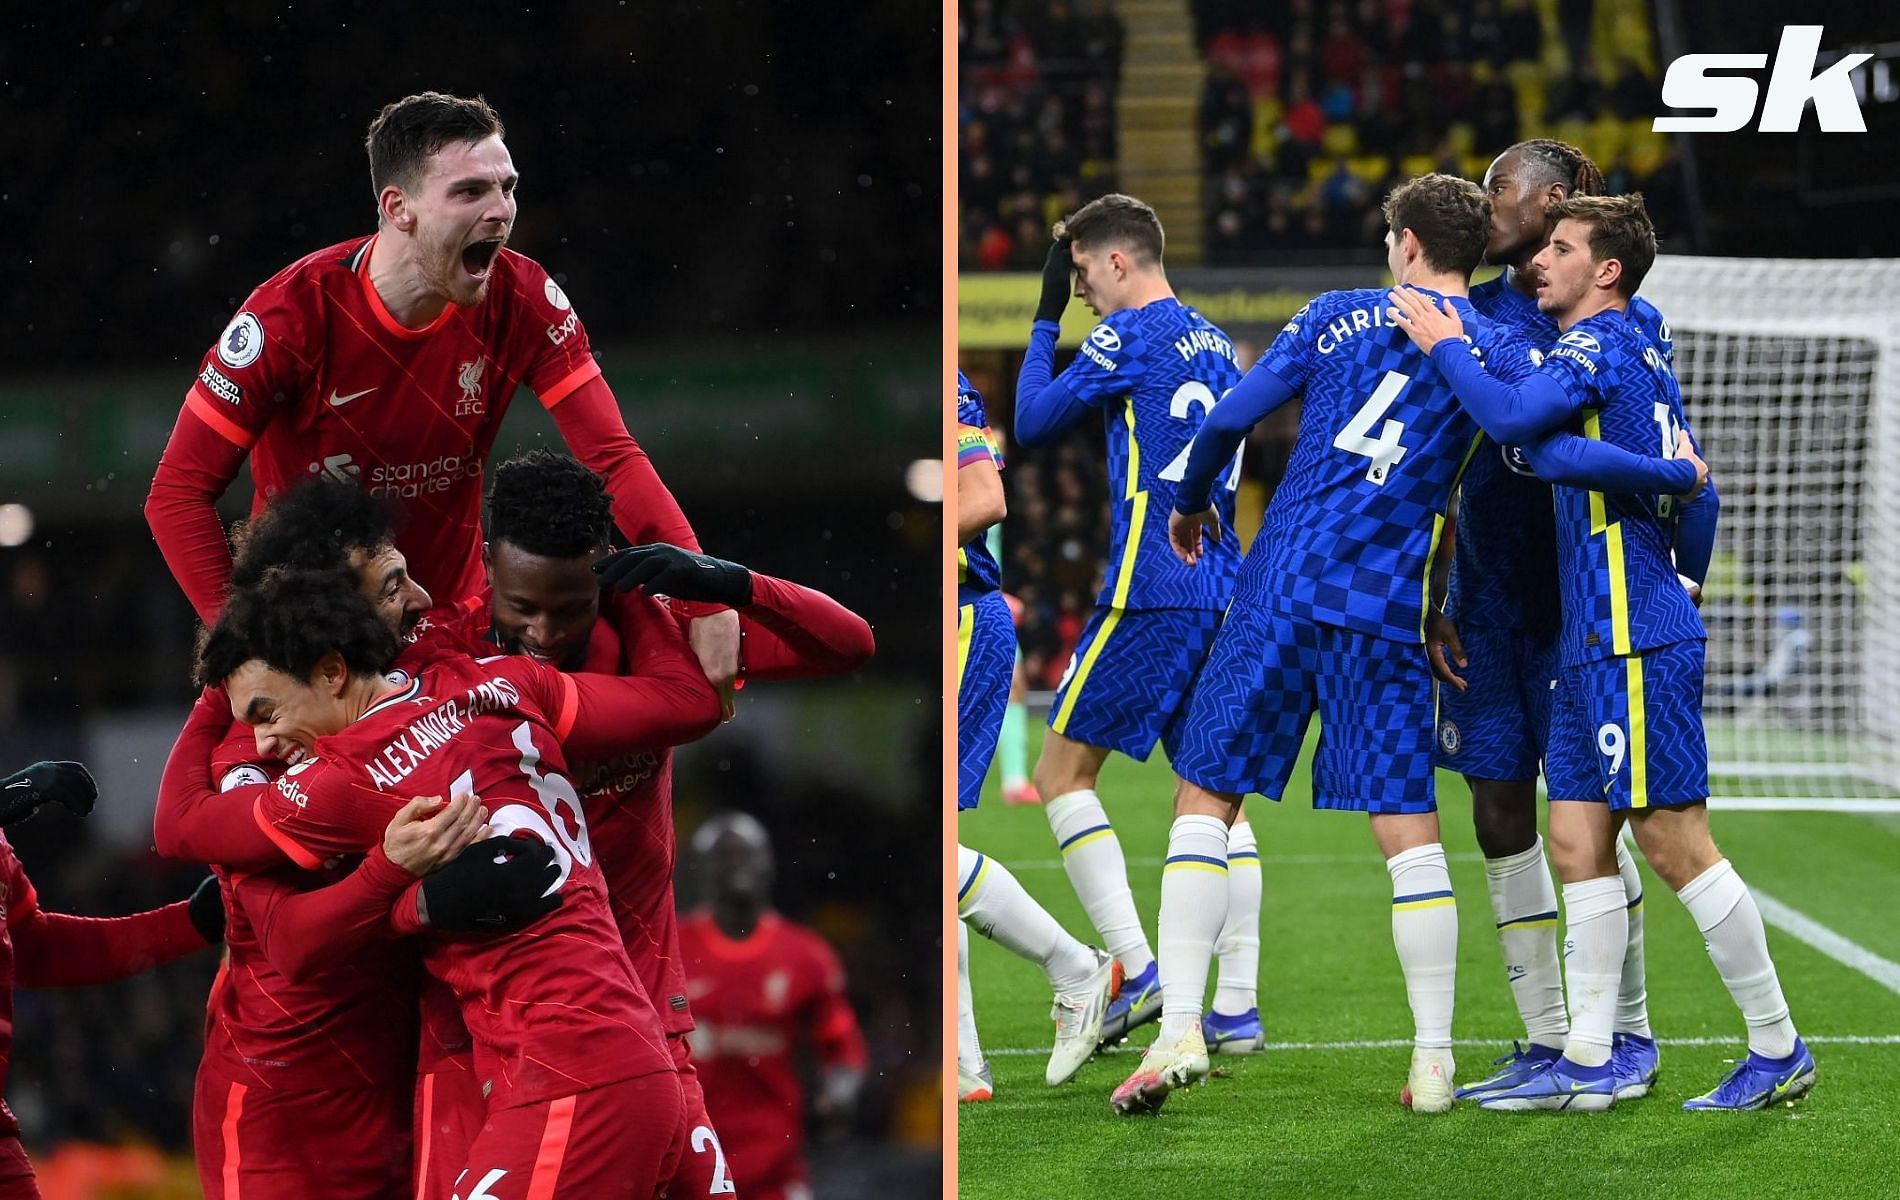 Chelsea and Liverpool are strong contenders for the Premier League title this season